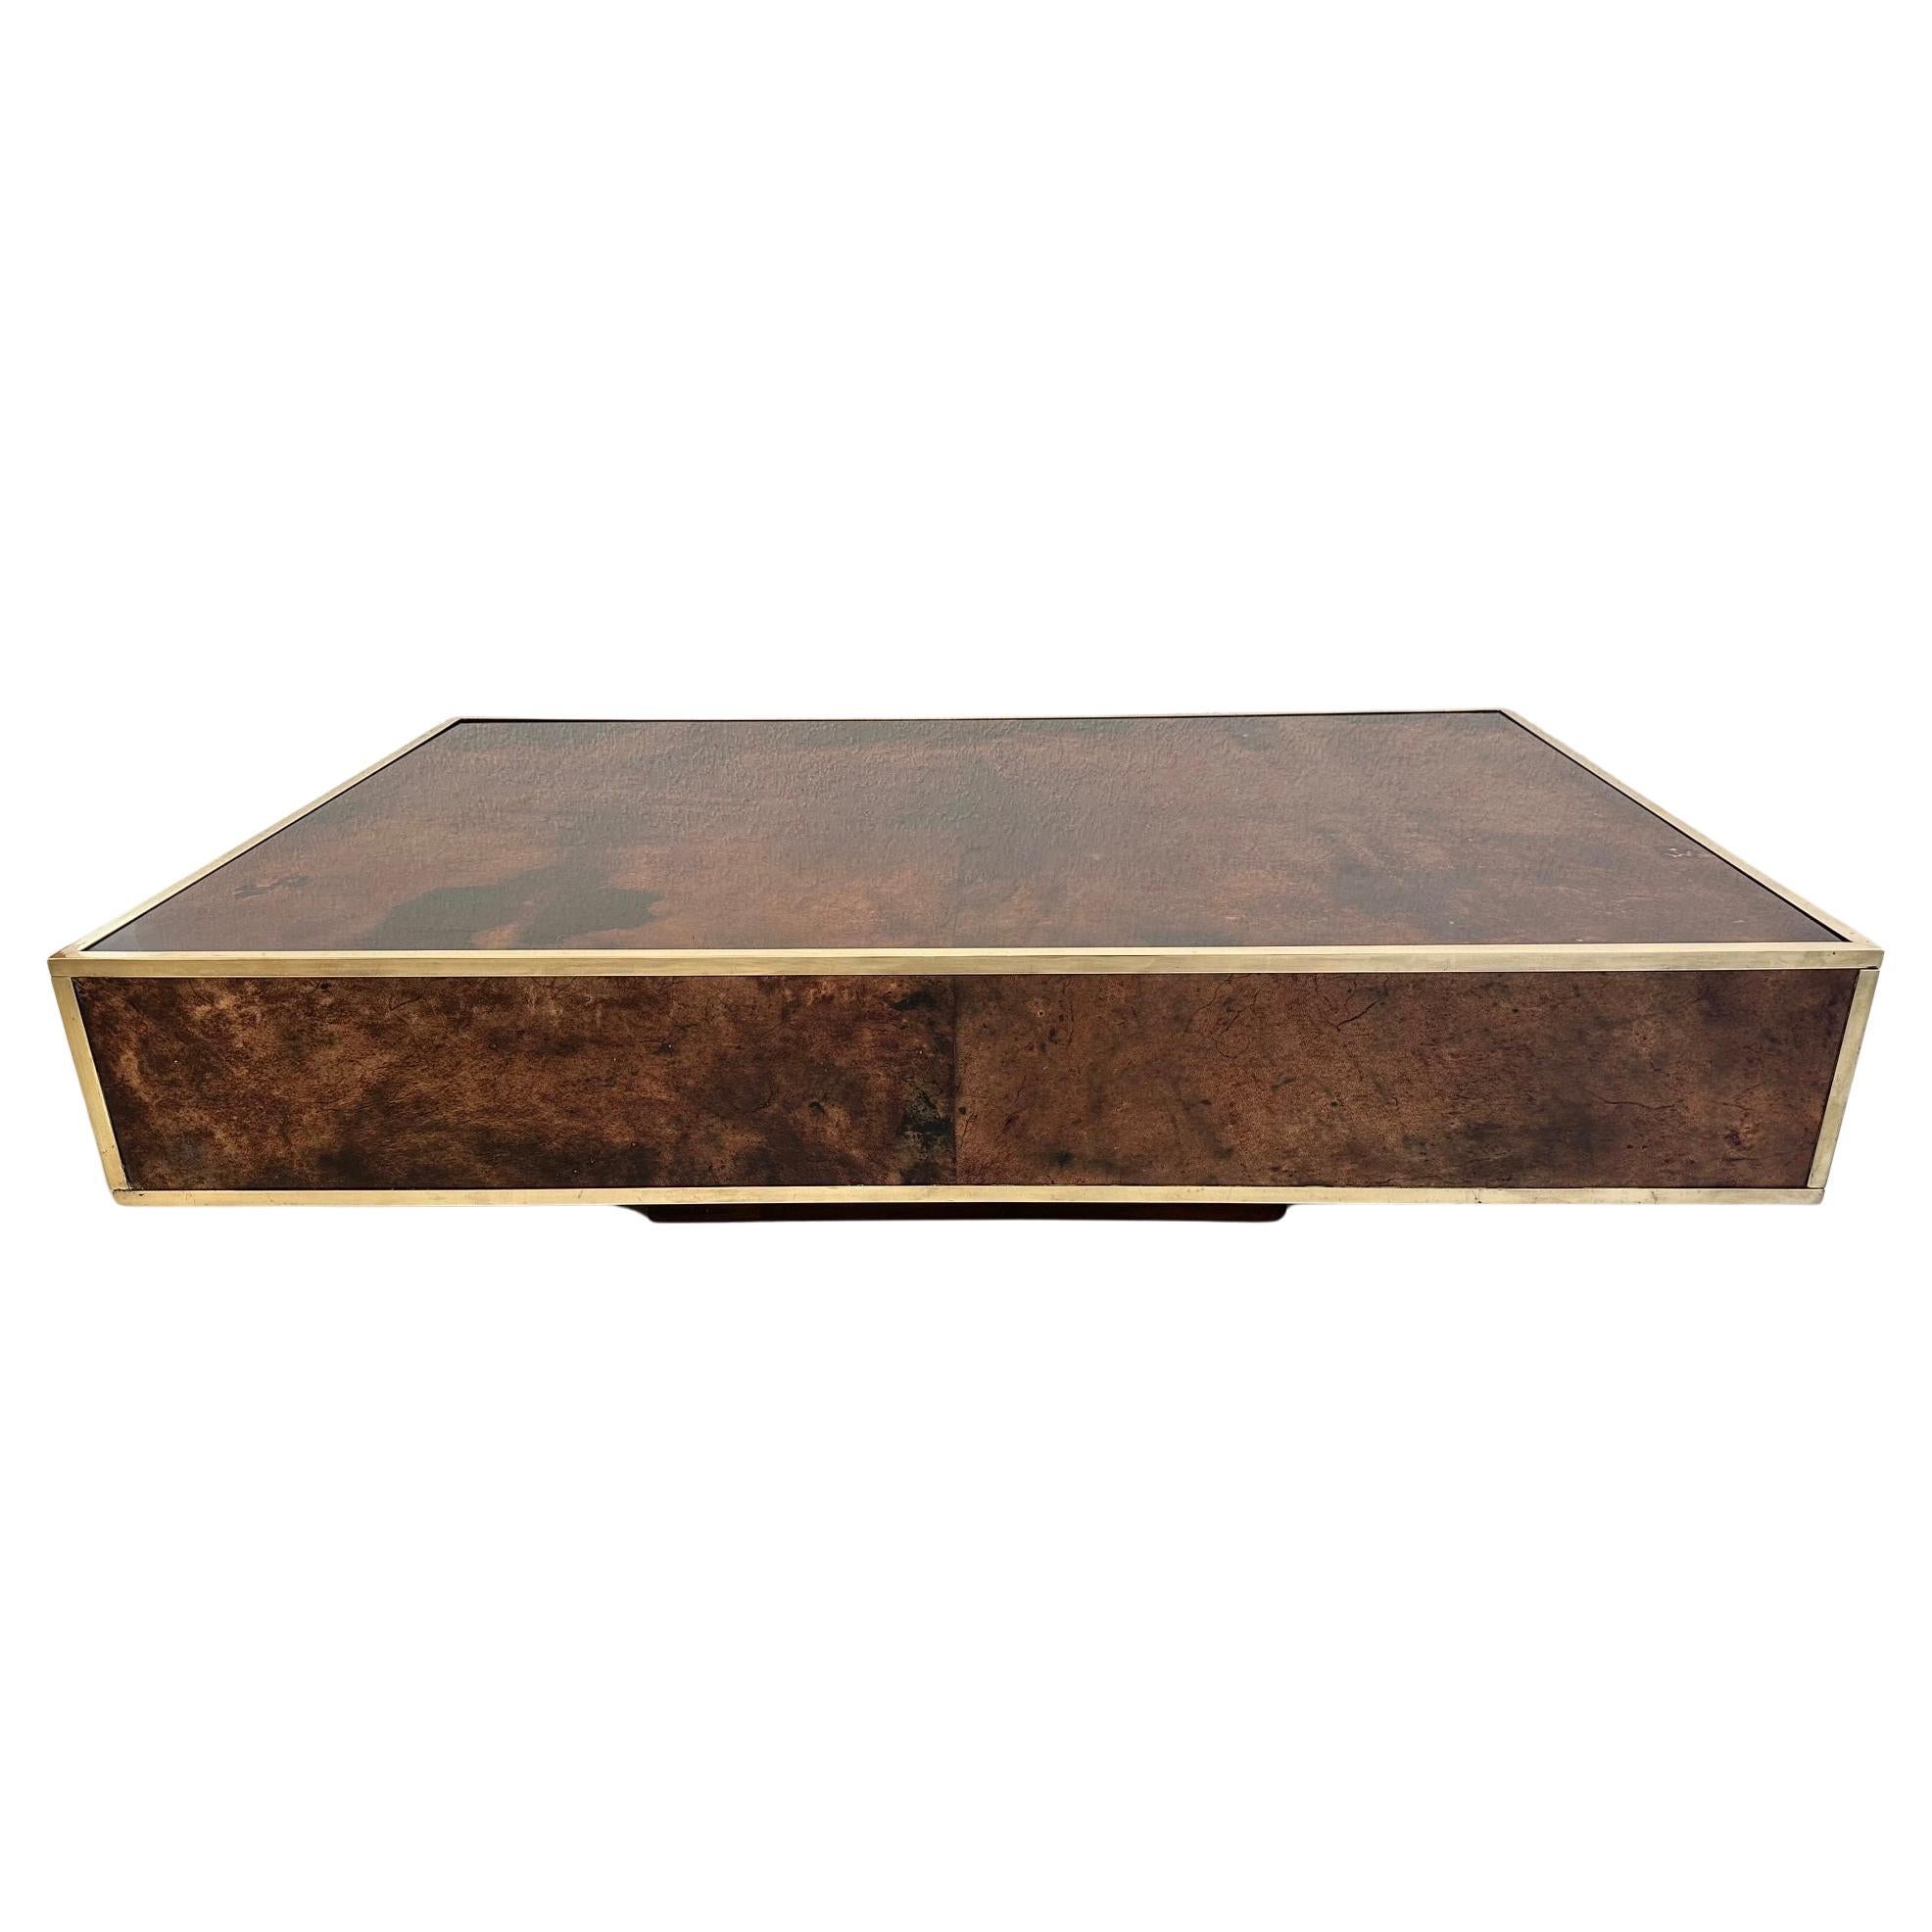 Vintage Goatskin & Brass Coffee Table by Aldo Tura, Italy ca. 1970s For Sale